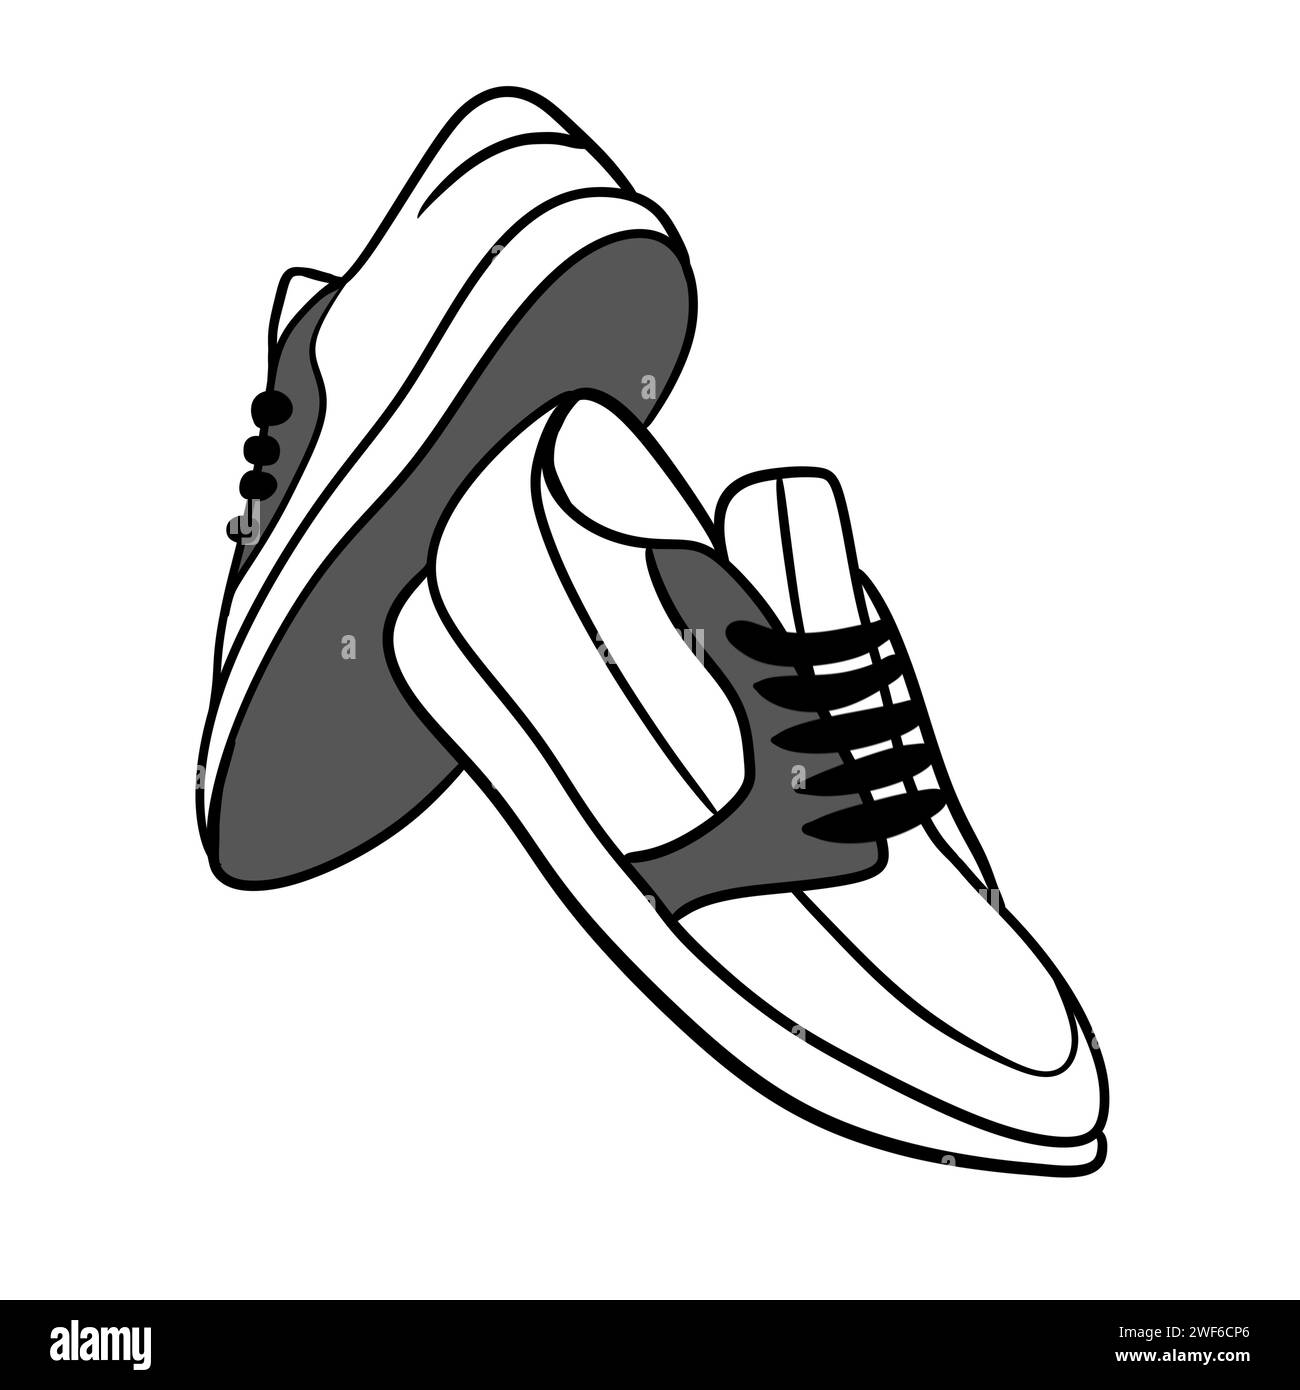 Hand drawn illustration of sneakers trainers running shoes in black and white. Modern monochrome drawing of sportwear footwear trendy walking wear lifestyle fashiom, healthy active concept Stock Photo